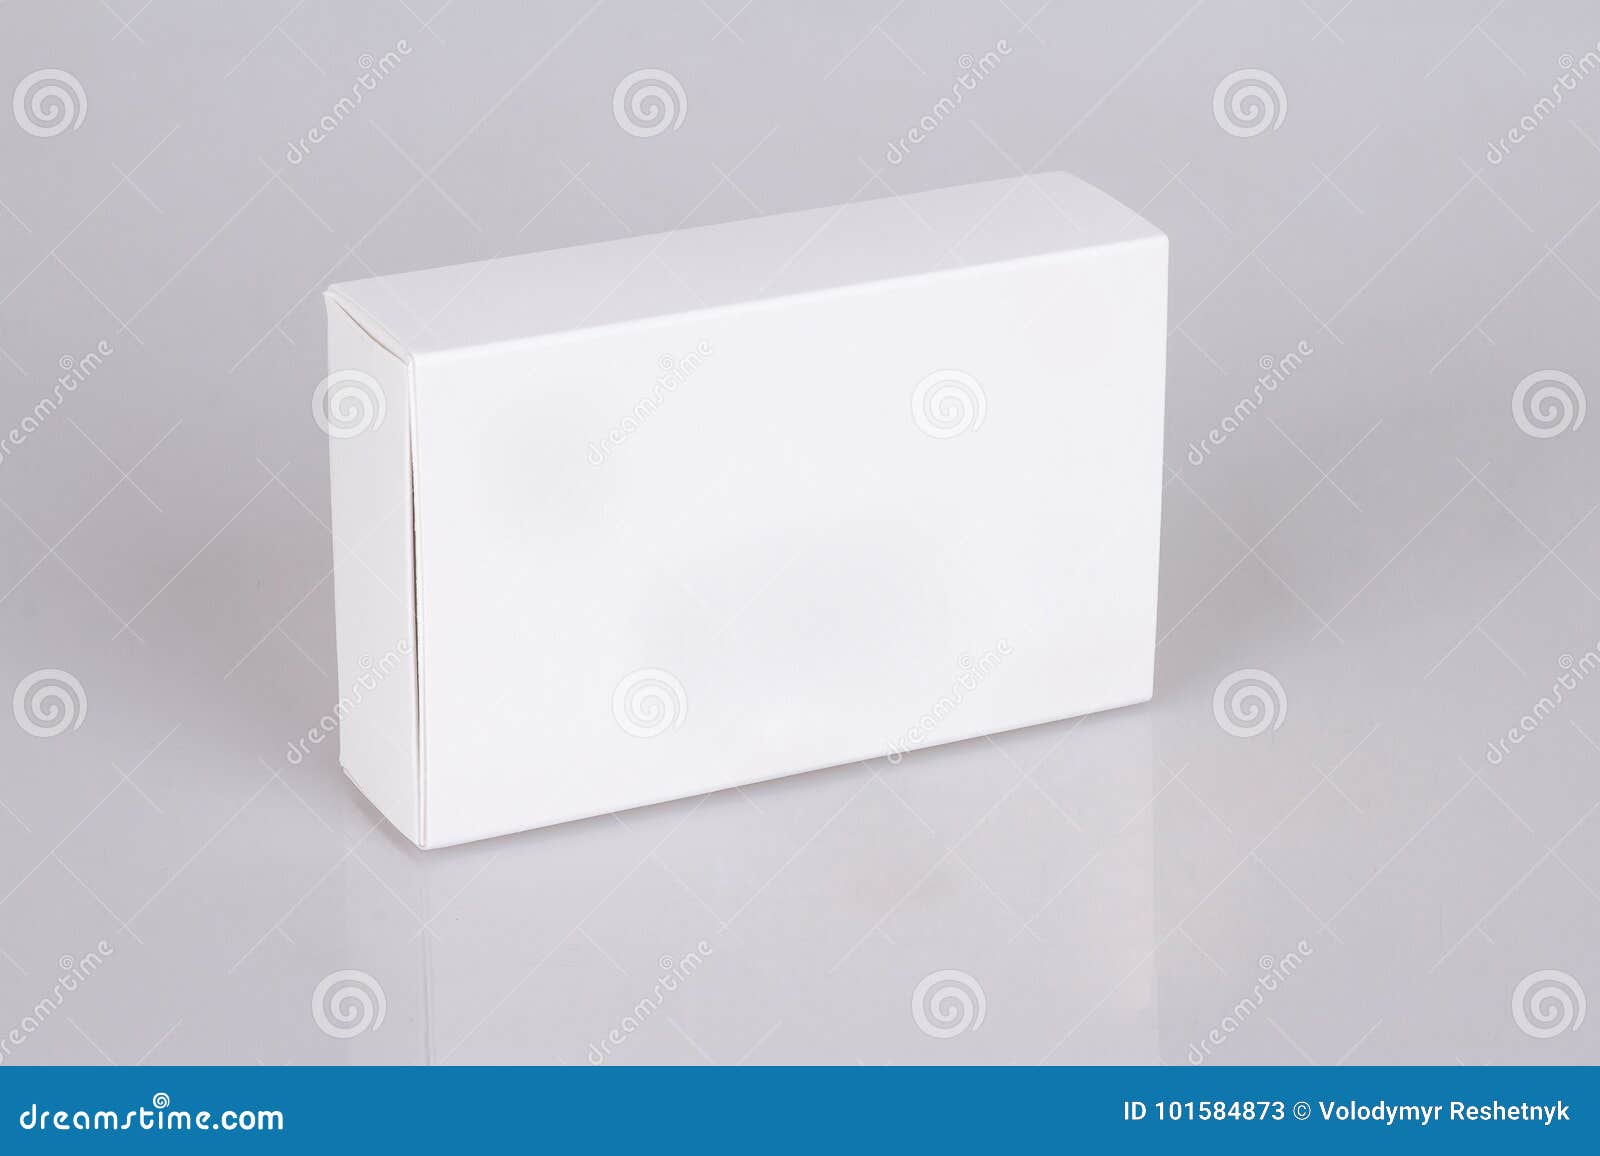 Download White Boxes Whith Reflection Mockup Ready For Your Design Box Perspective Stock Image Image Of Gift Computer 101584873